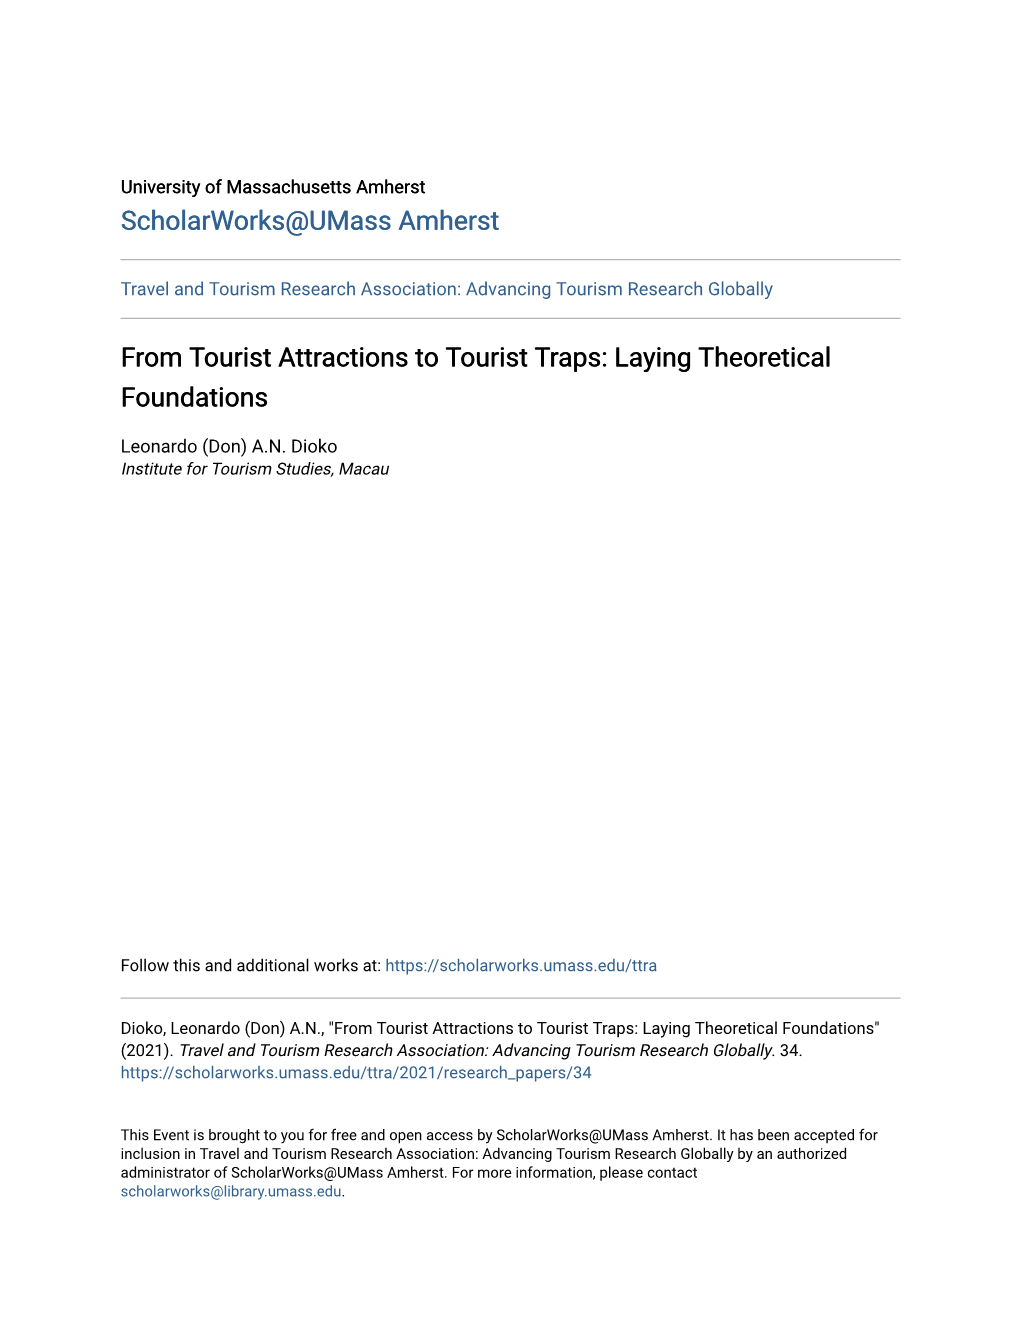 From Tourist Attractions to Tourist Traps: Laying Theoretical Foundations